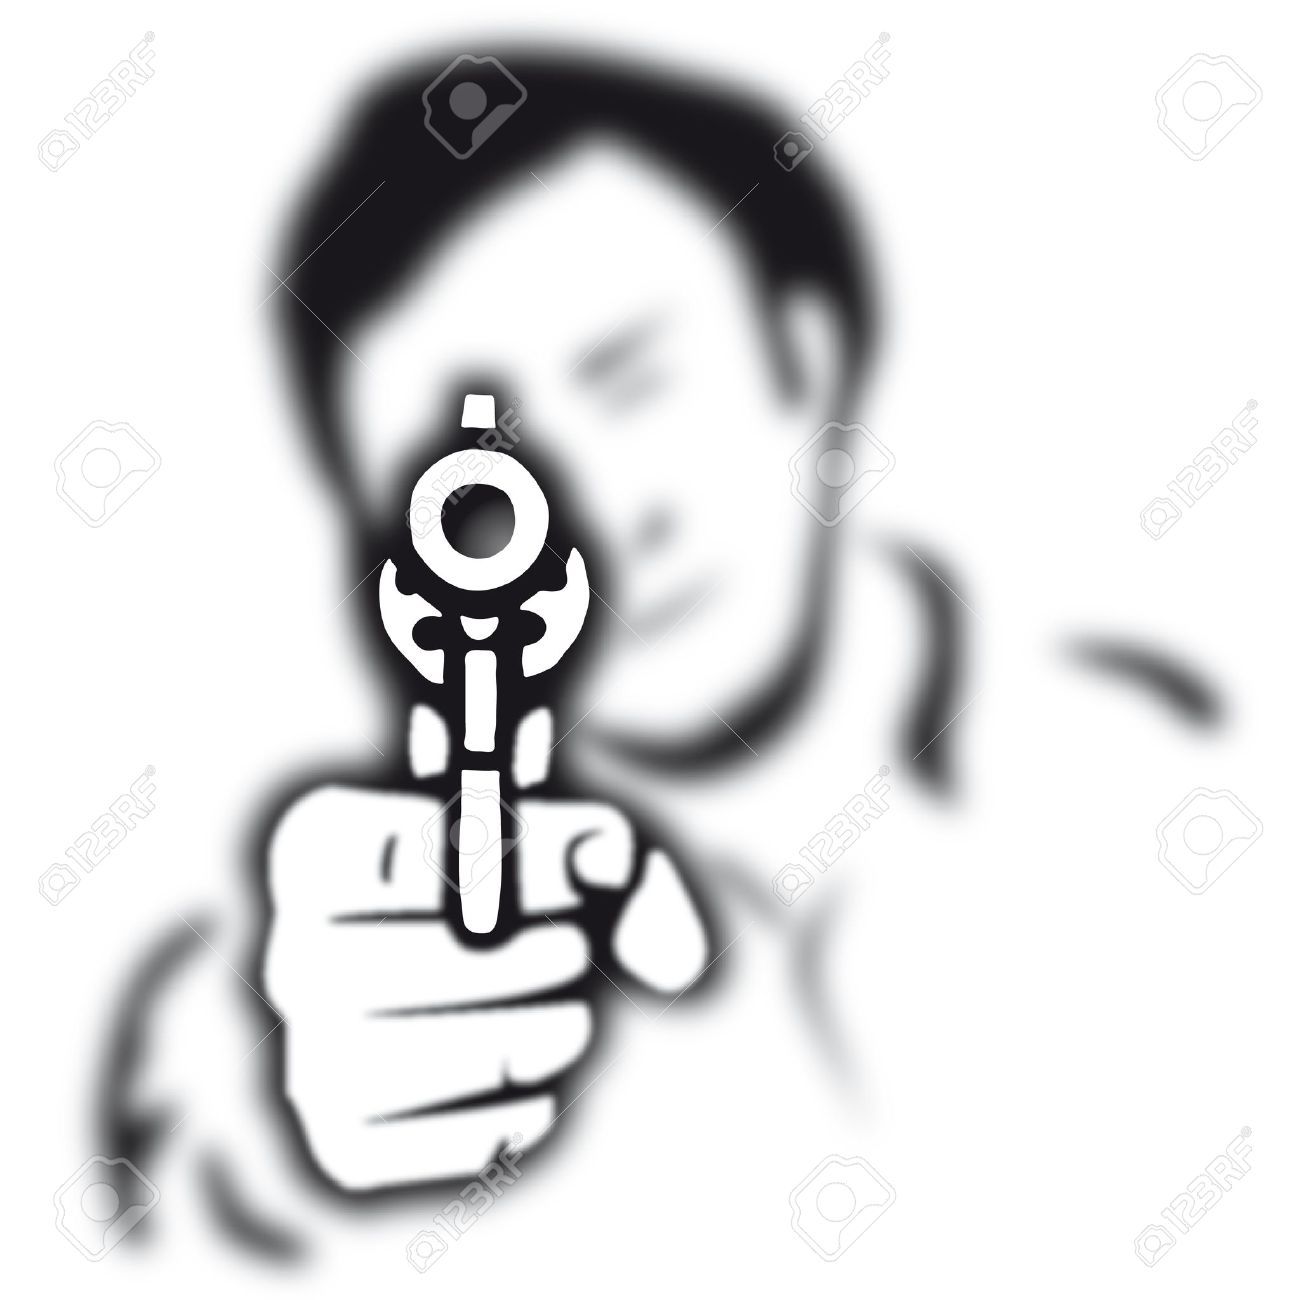 murder clipart black and white